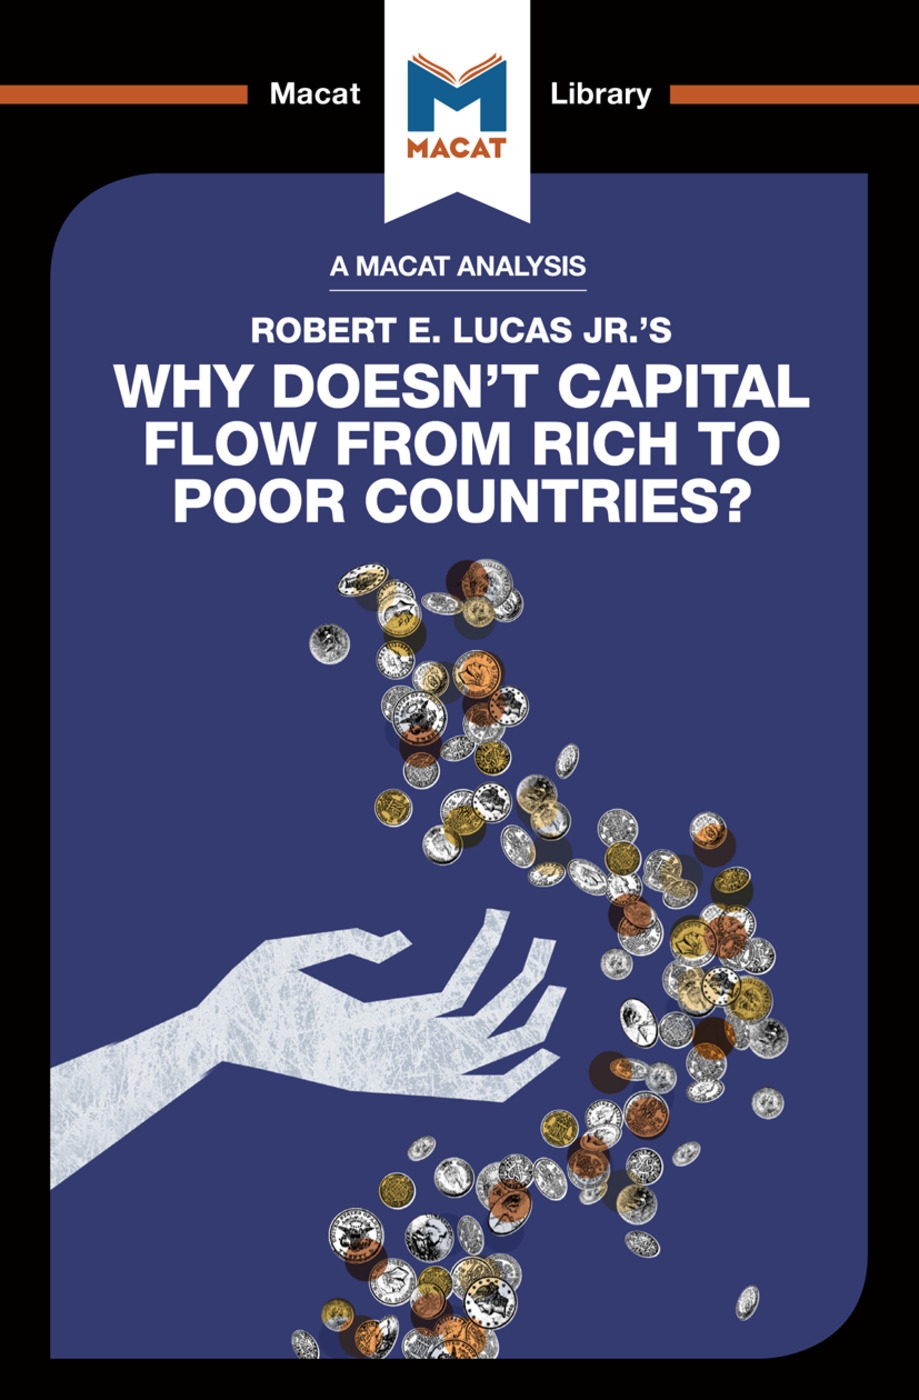 Why Doesn’t Capital Flow from Rich to Poor Countries?